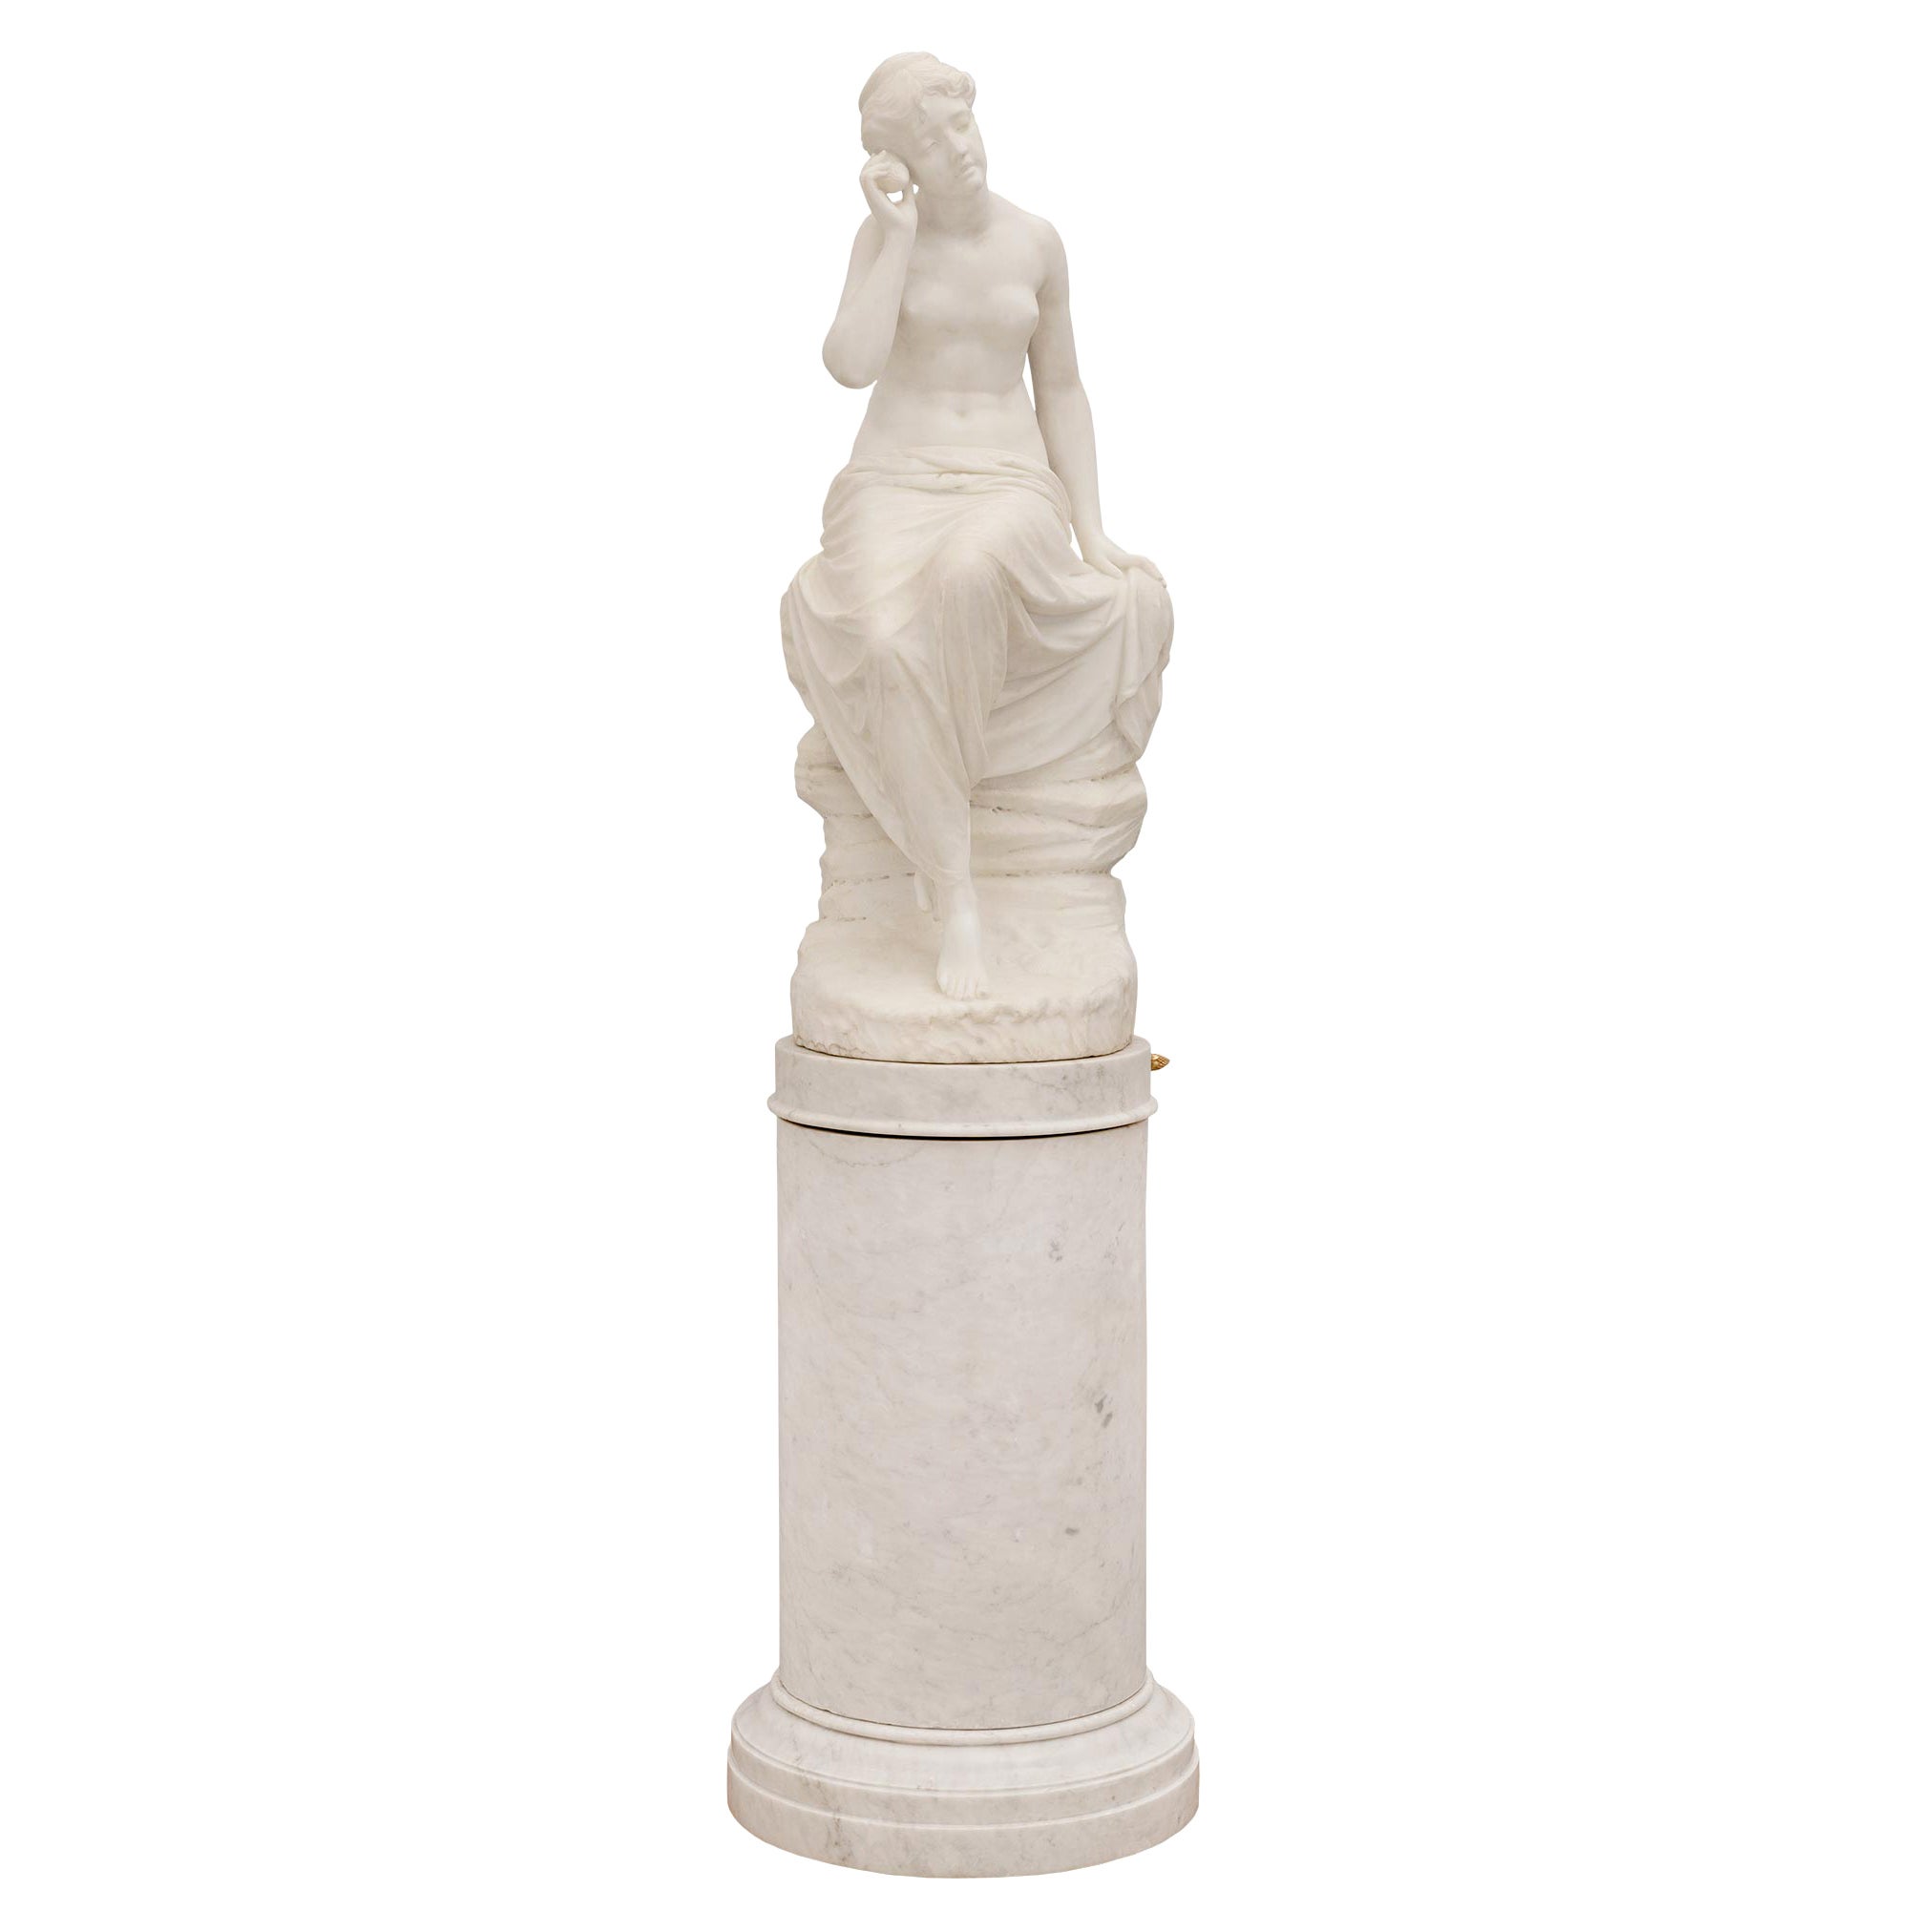 Italian 19th Century Marble Statue of a Girl with a Seashell